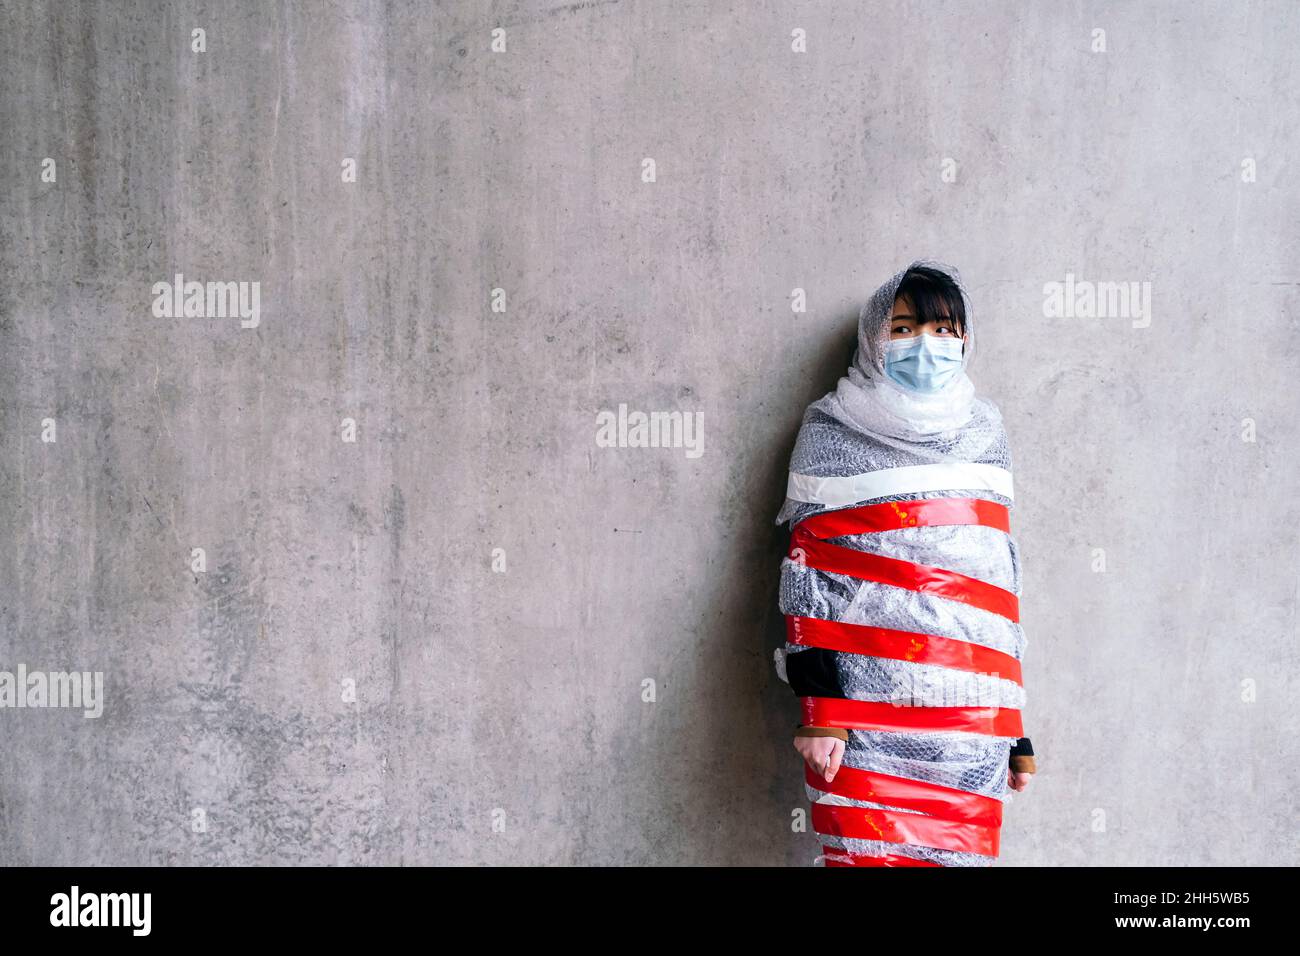 520 Person Wrapped In Bubble Wrap Stock Photos, High-Res Pictures